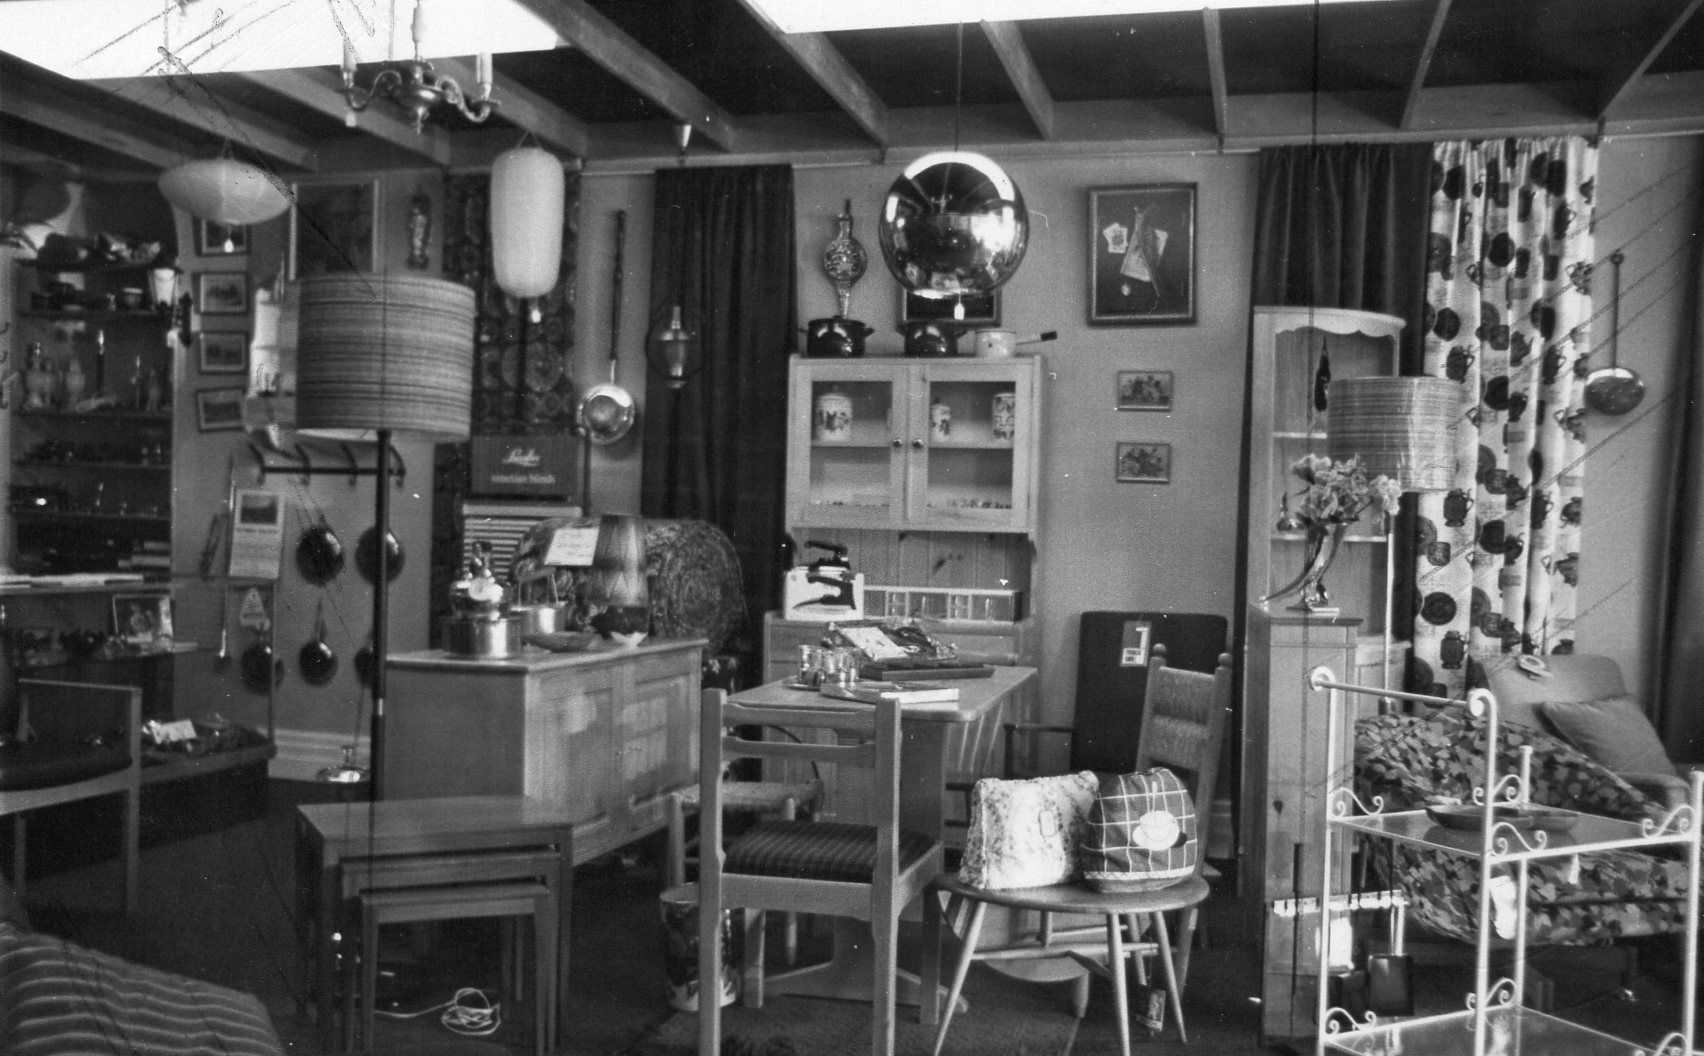 Homeware on display in the early days